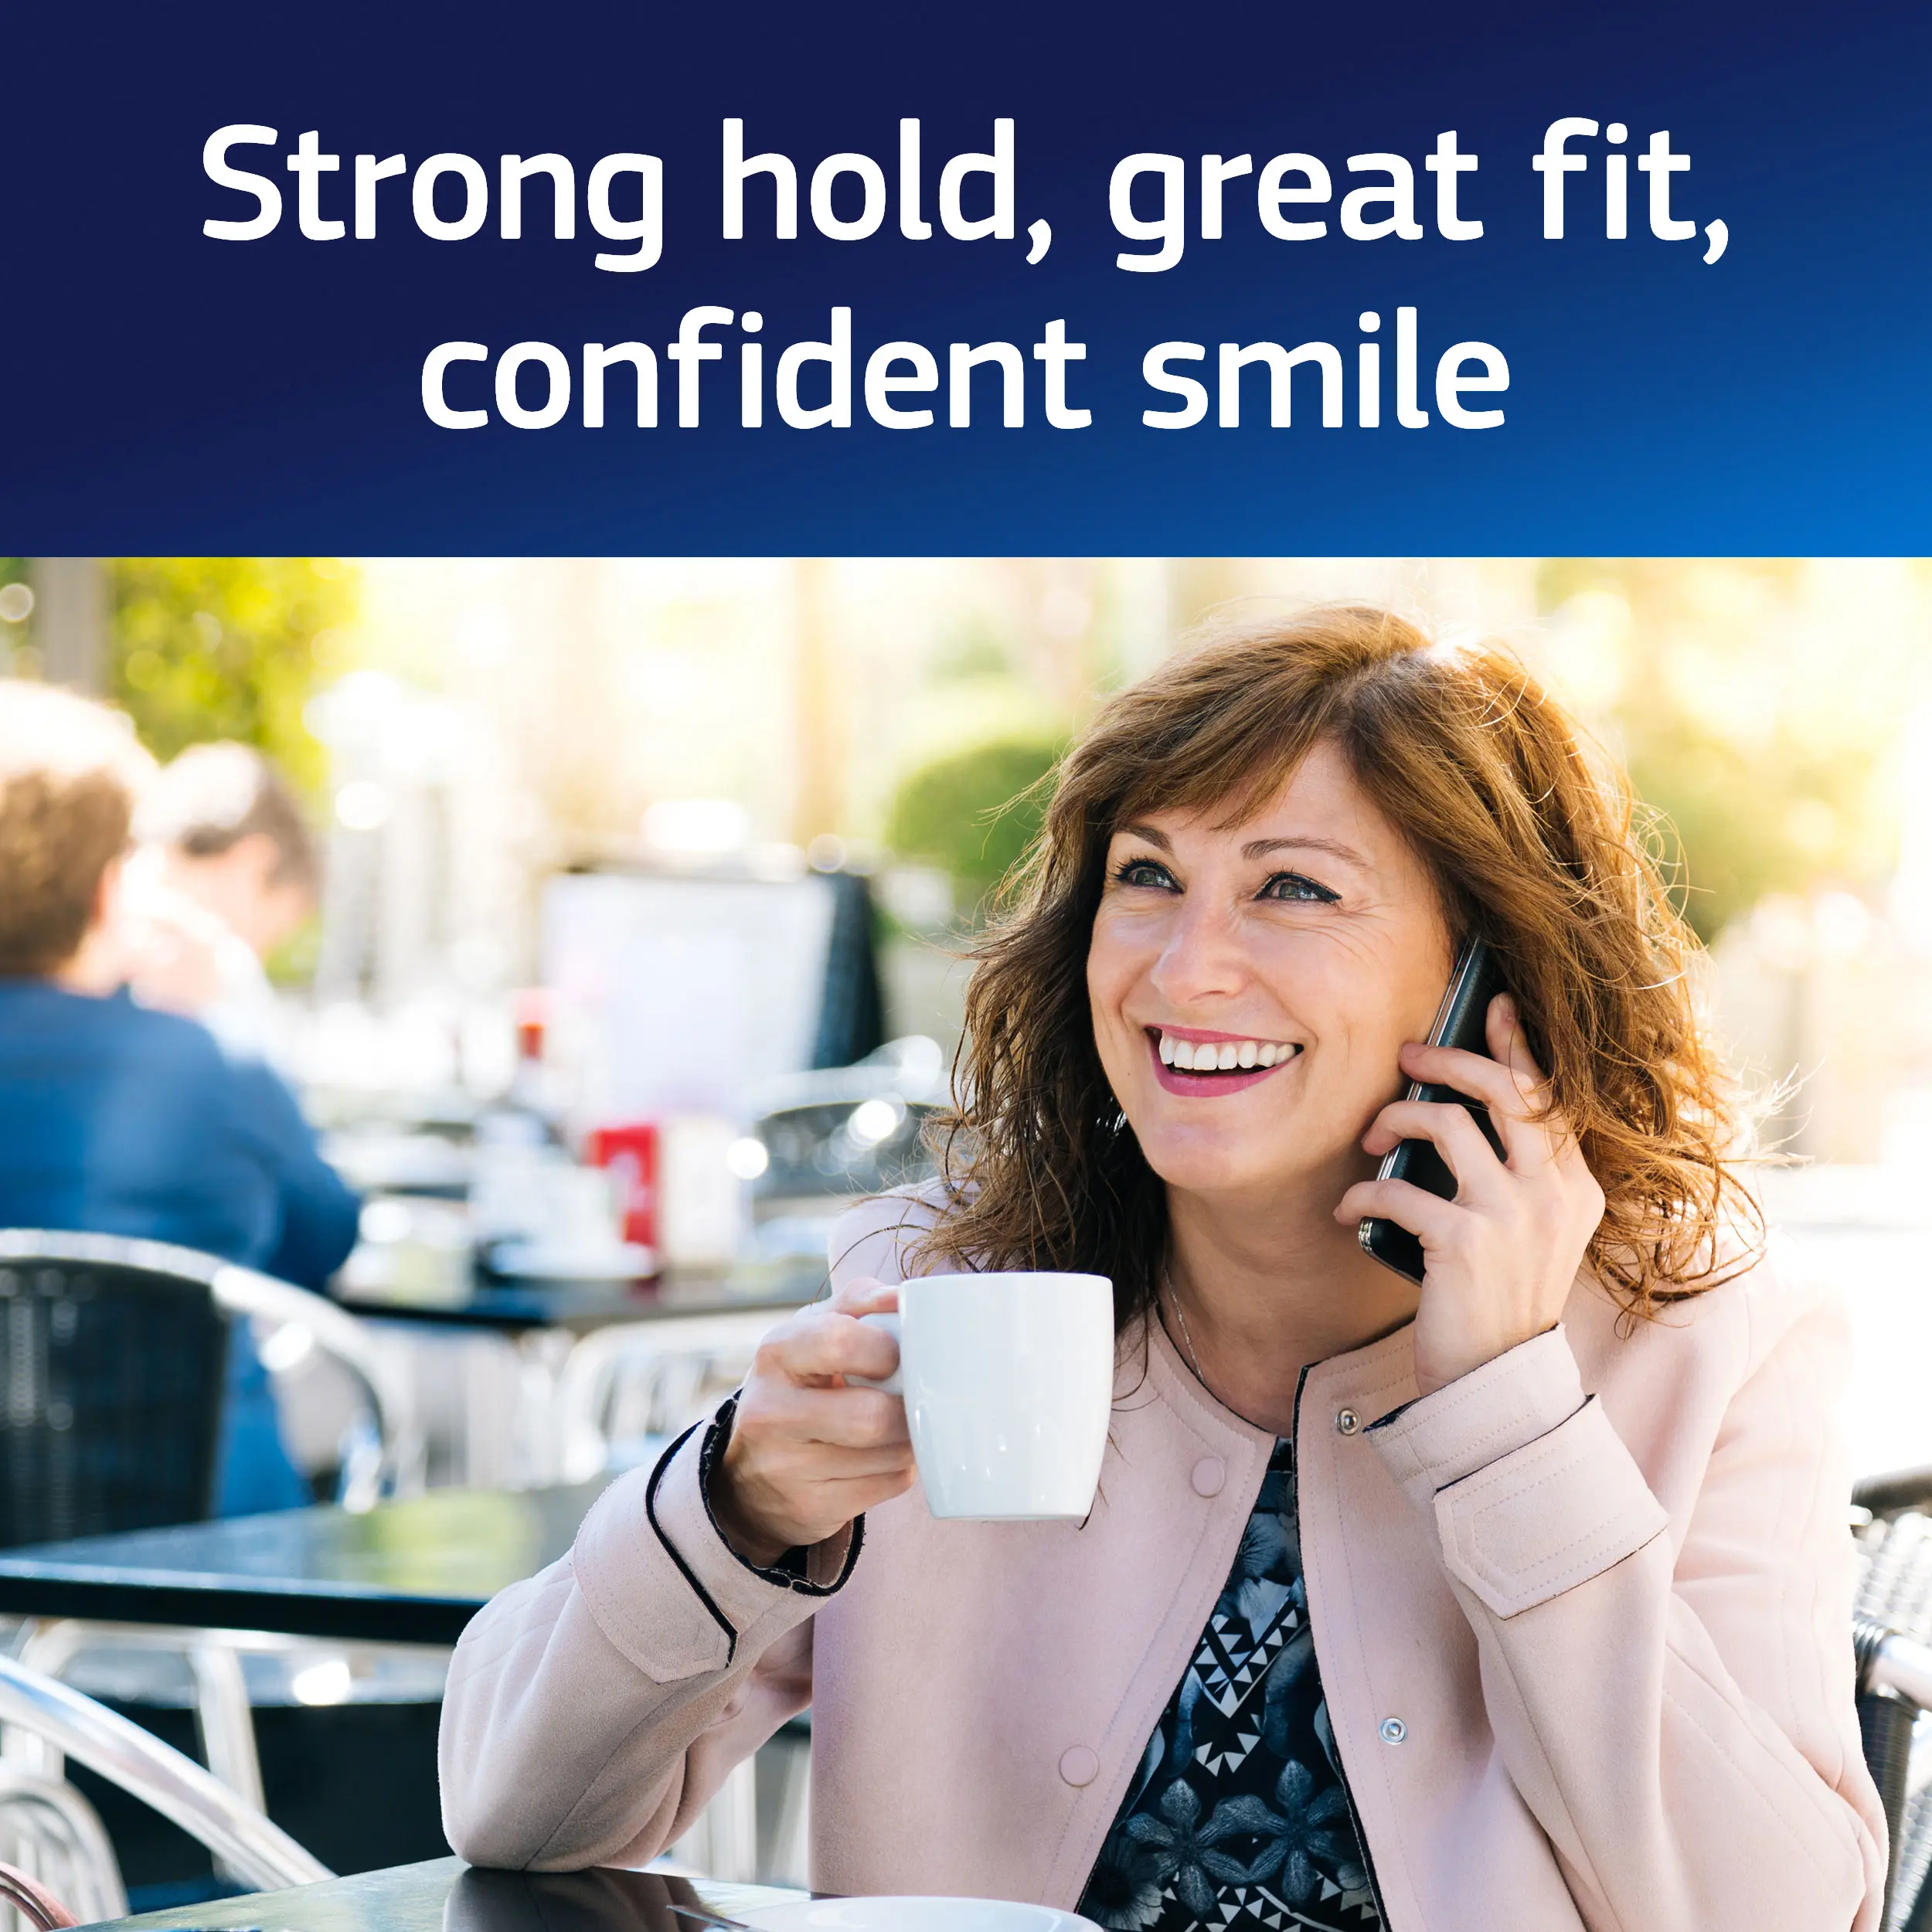 Fixodent Plus Scope - Strong hold, great fit, confident smile